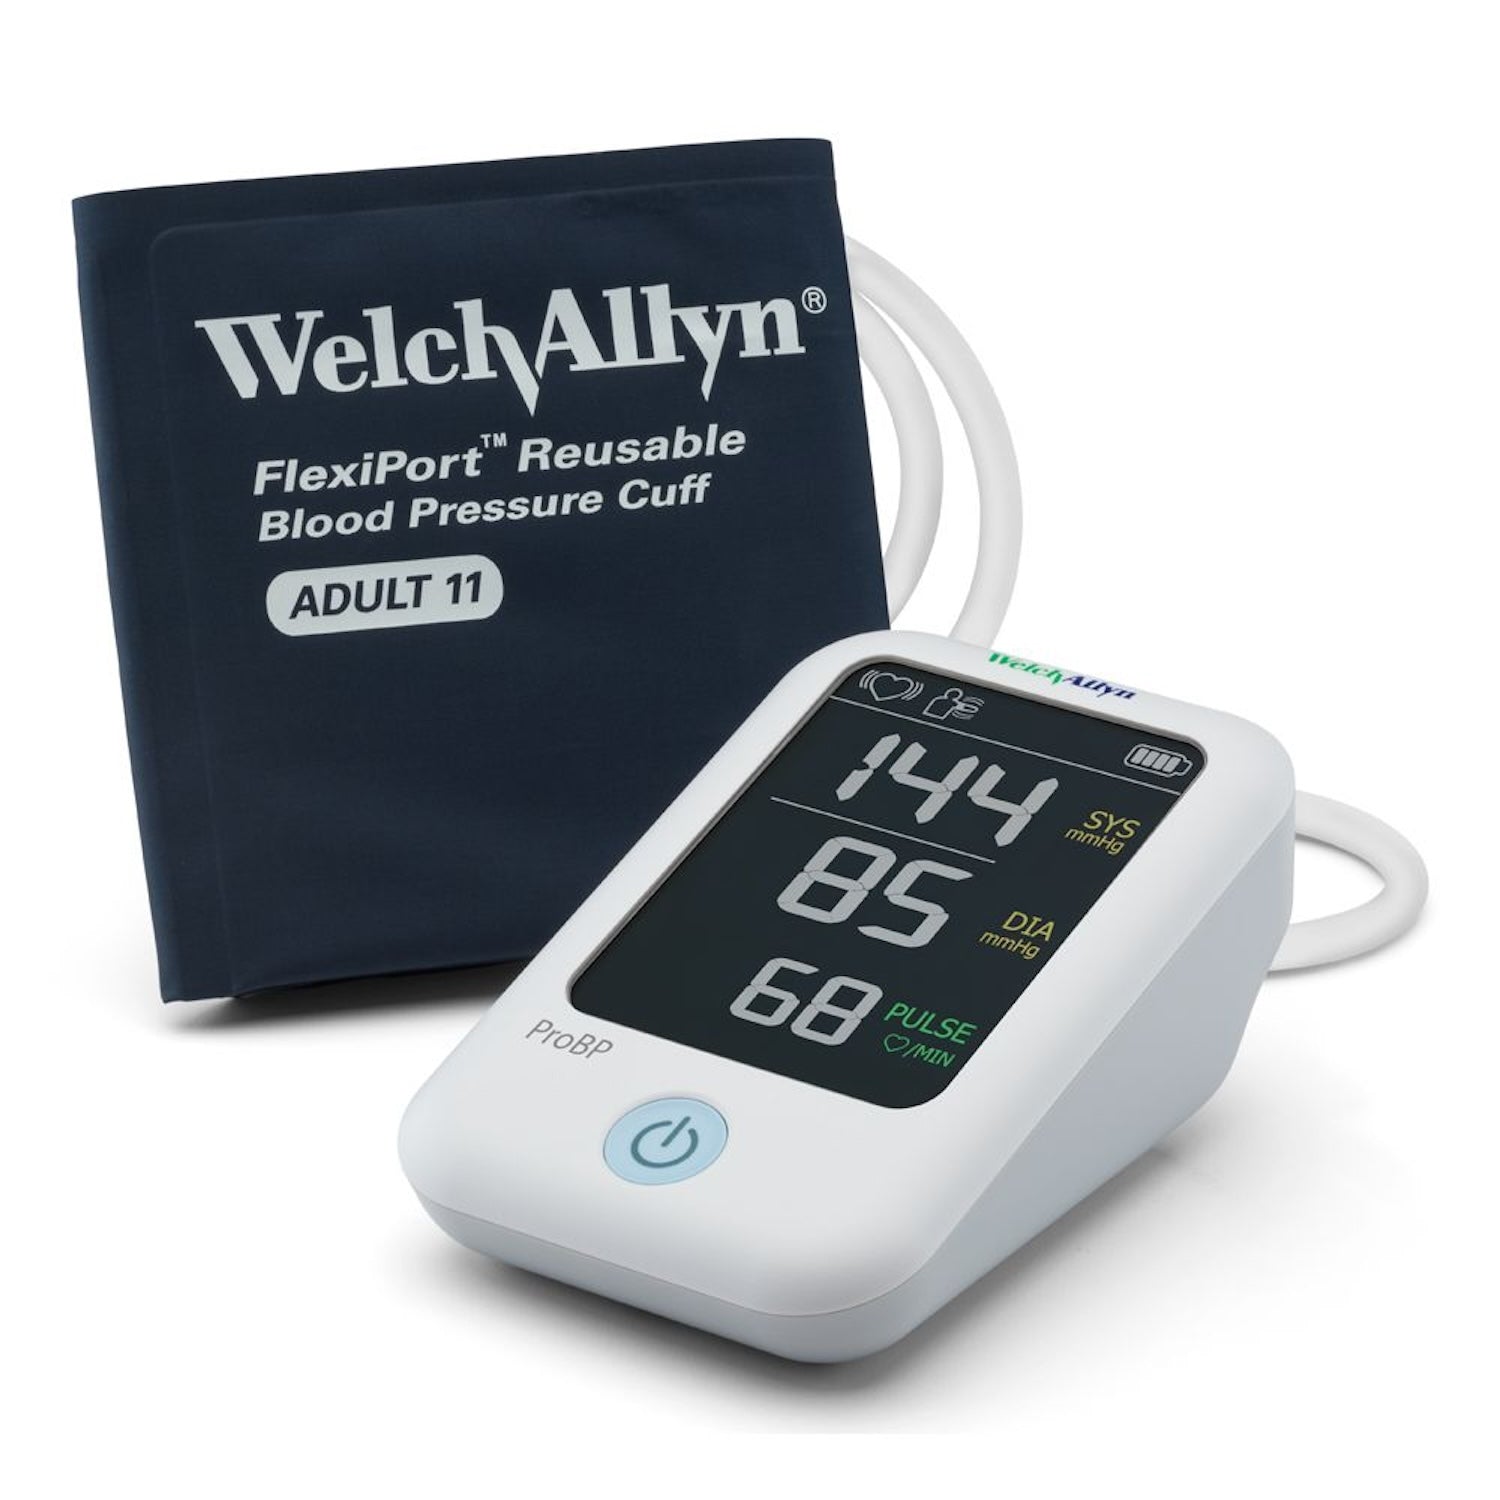 Welch Allyn ProBP 2000 BP unit with size 11 Adult FlexiPort Reusable BP Cuff & 4 x AA batteries